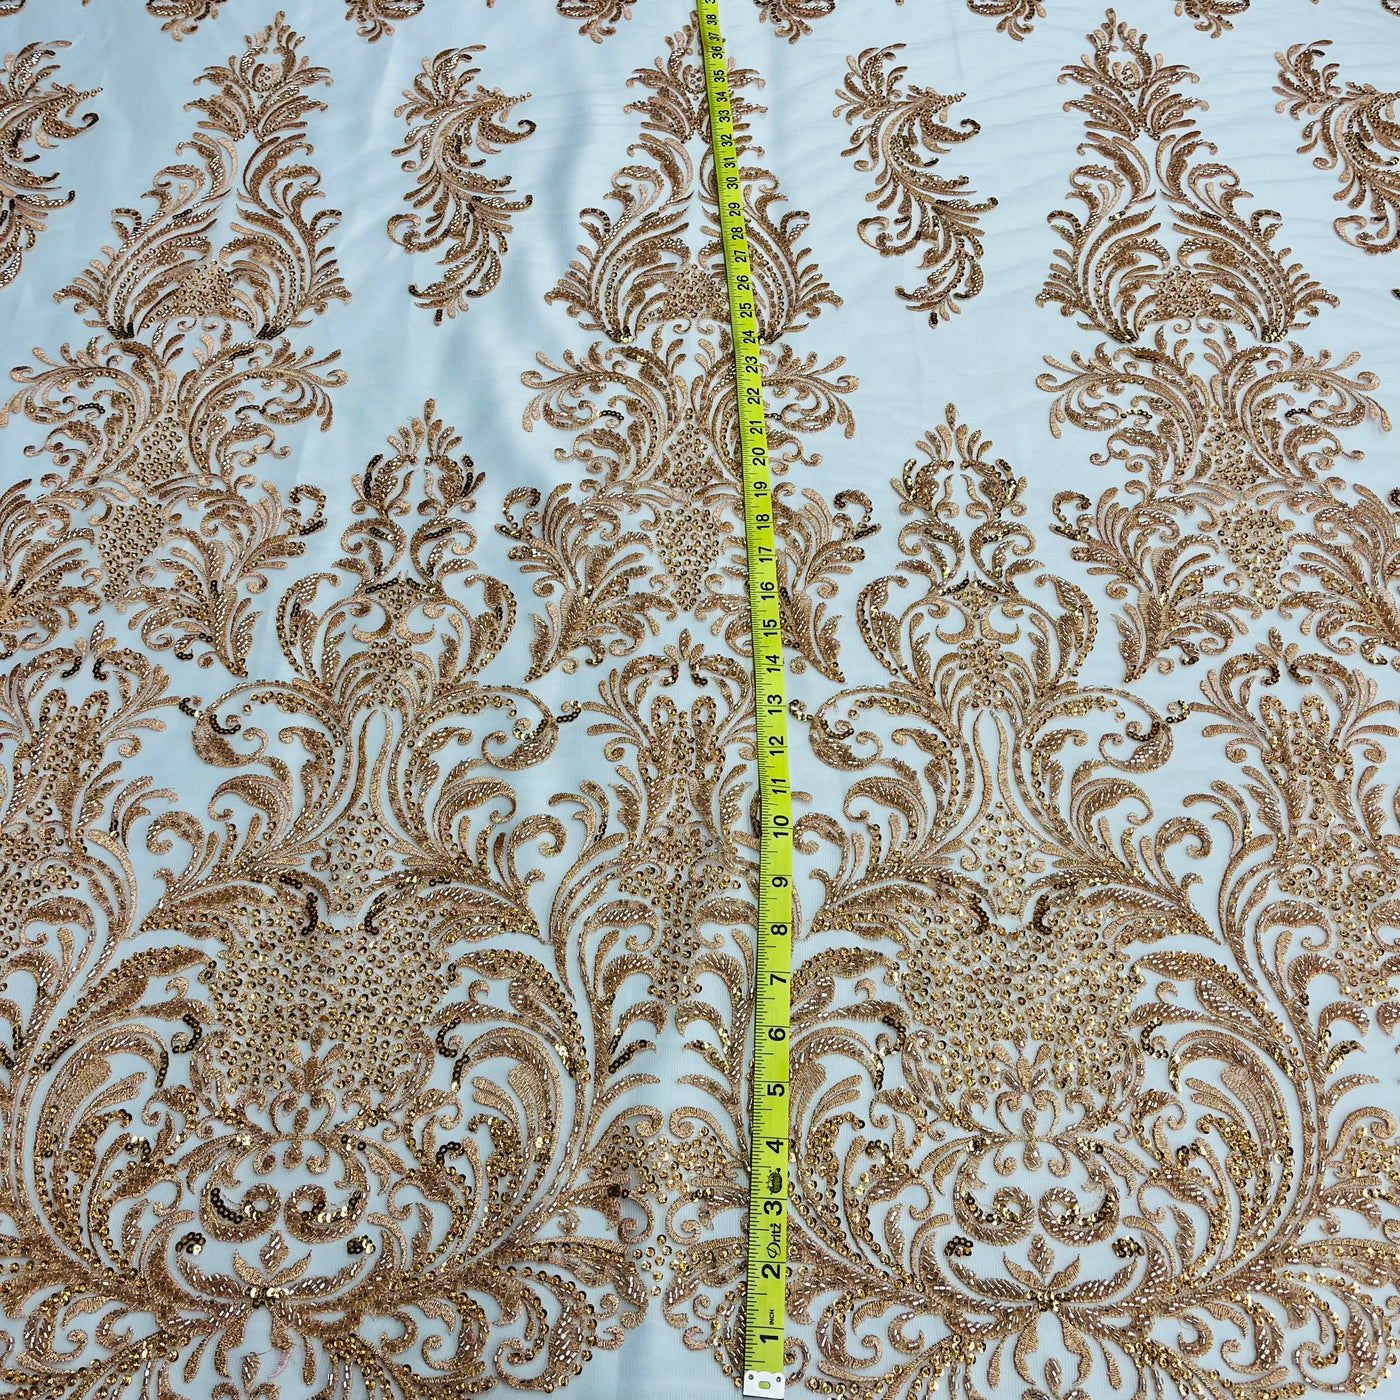 Beaded Lace Fabric Embroidered on 100% Polyester Net Mesh | Lace USA-GD-13267